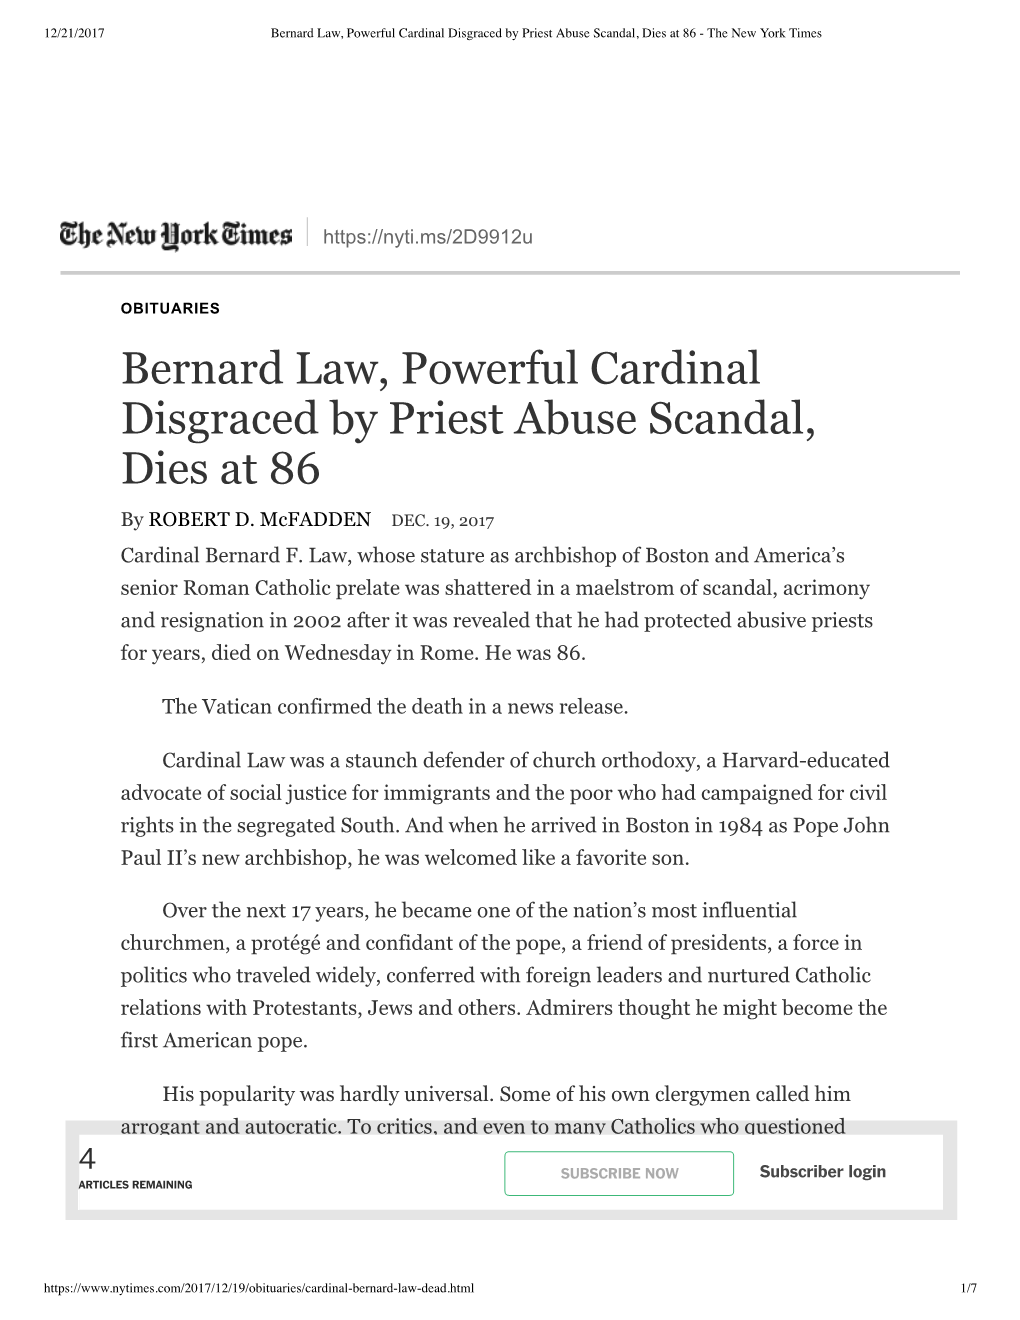 Bernard Law, Powerful Cardinal Disgraced by Priest Abuse Scandal, Dies at 86 - the New York Times